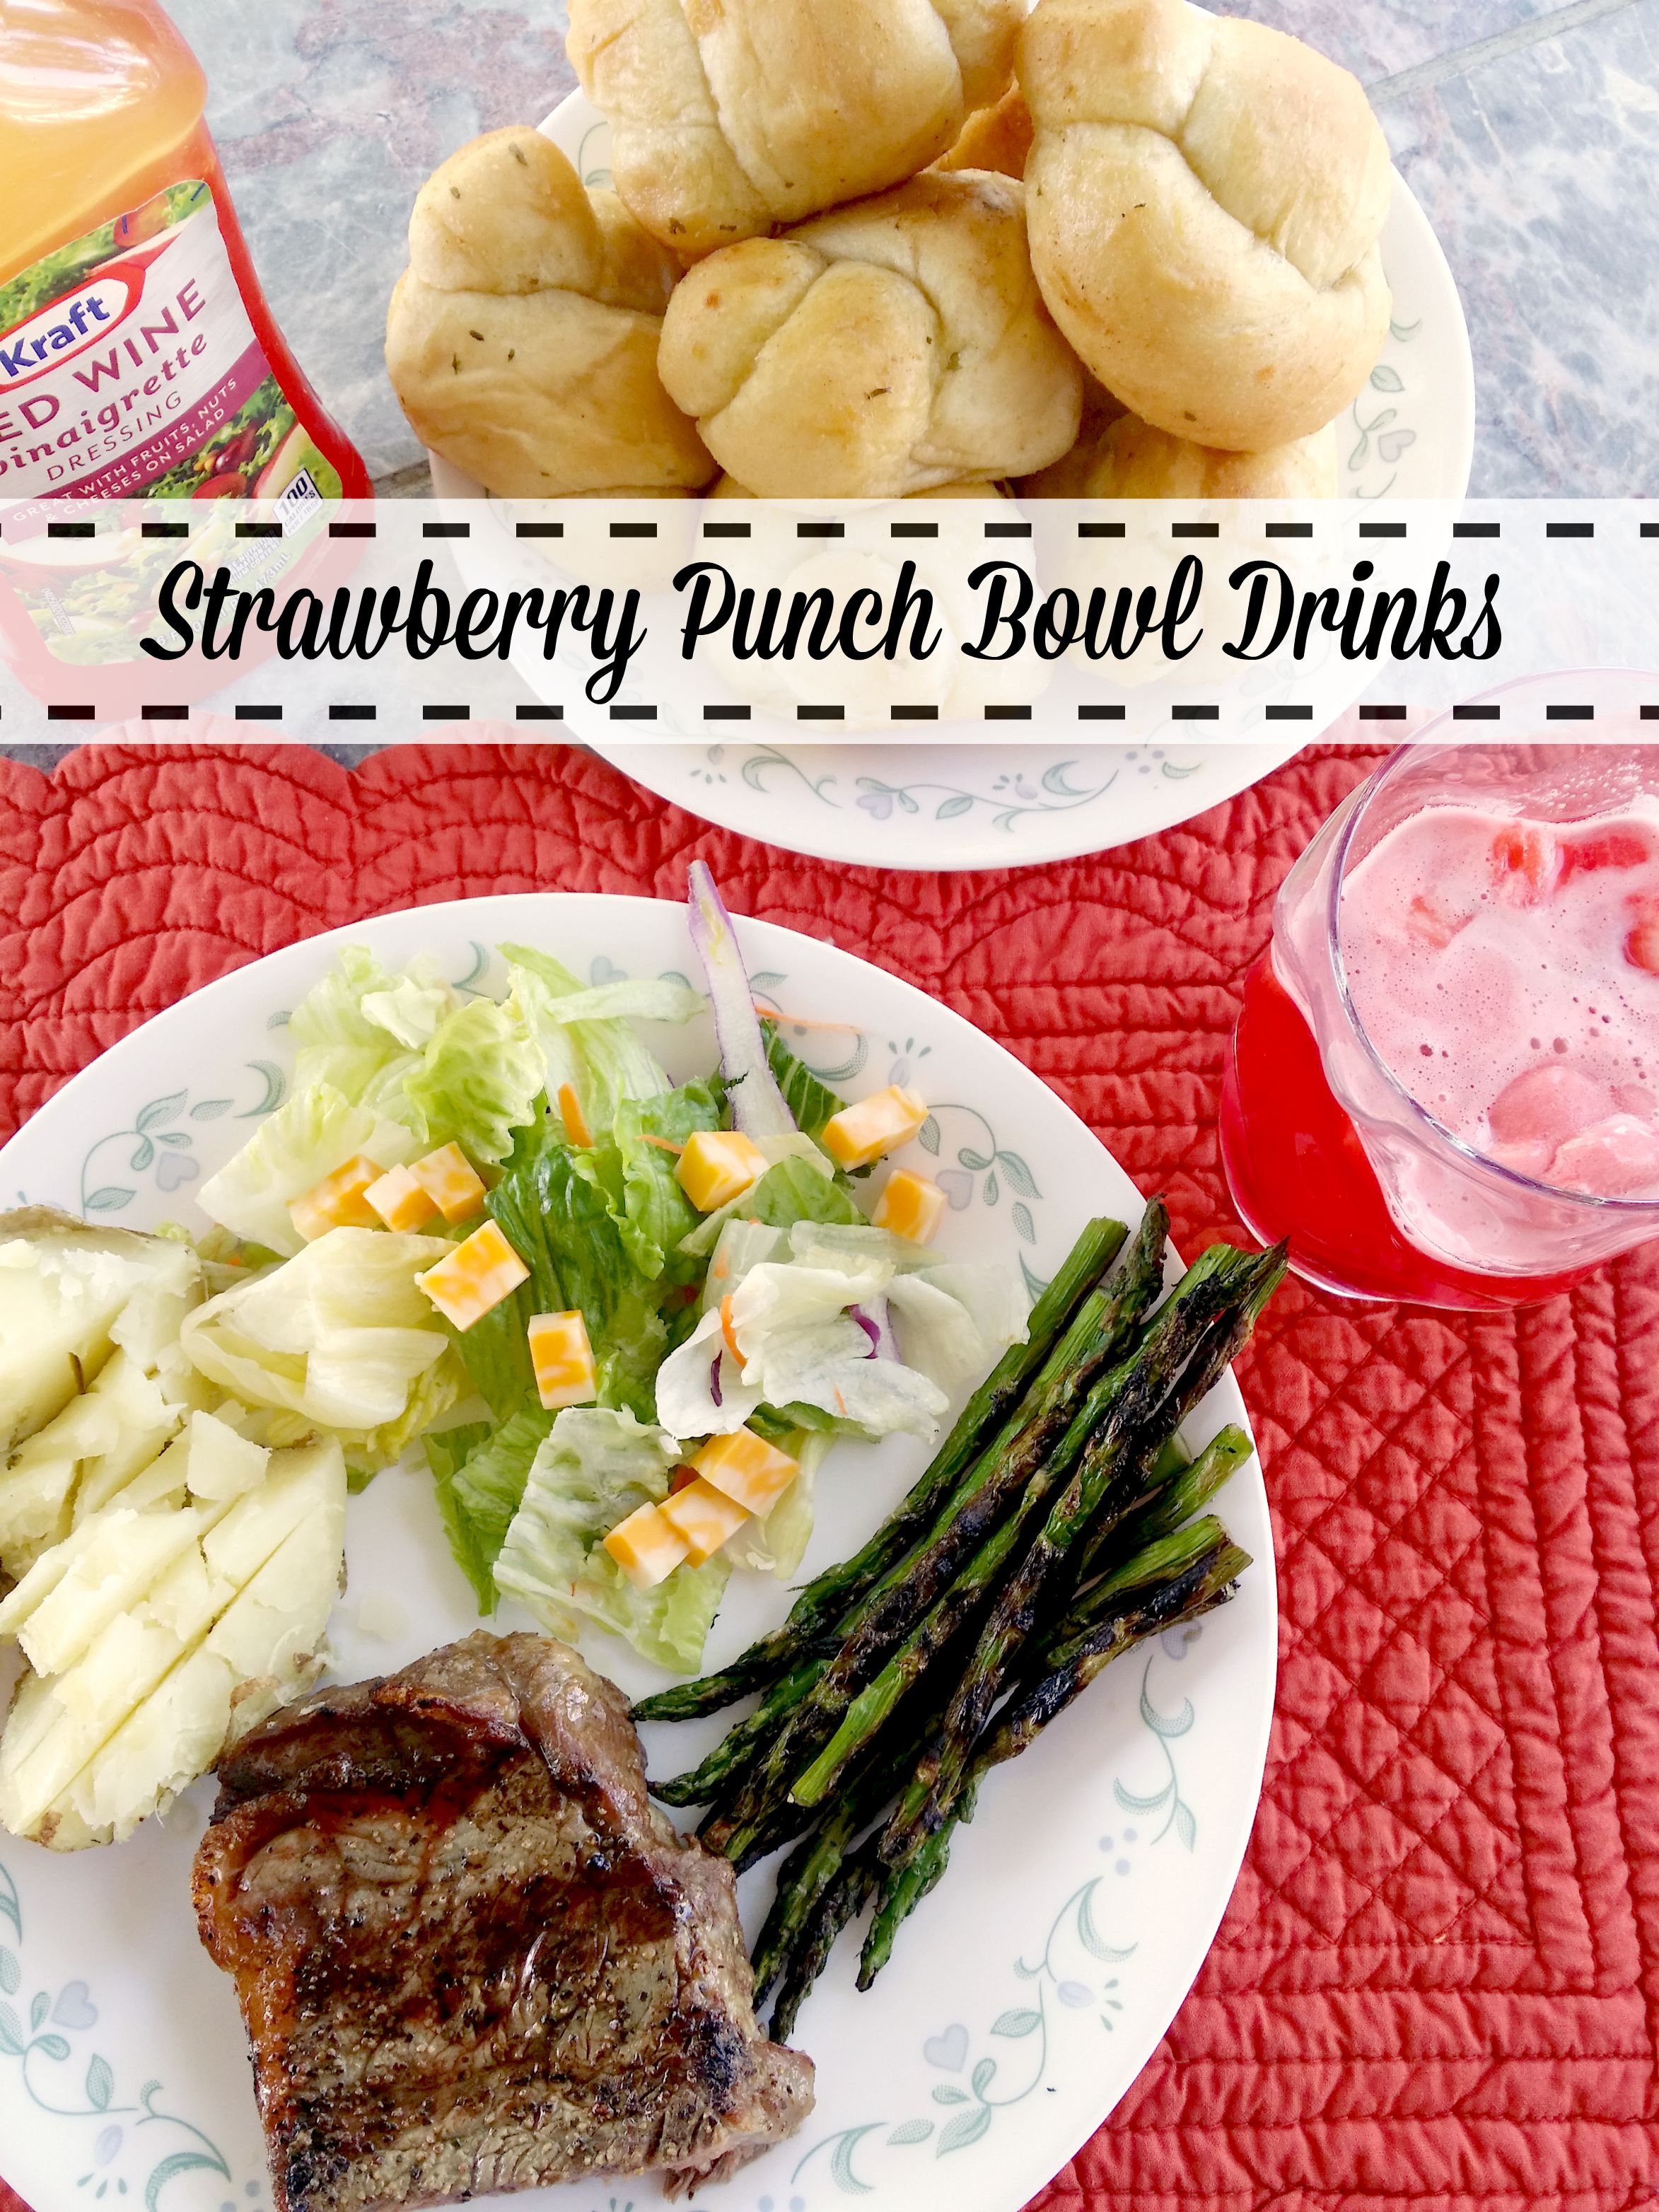 Strawberry Punch Bowl Drink Recipe